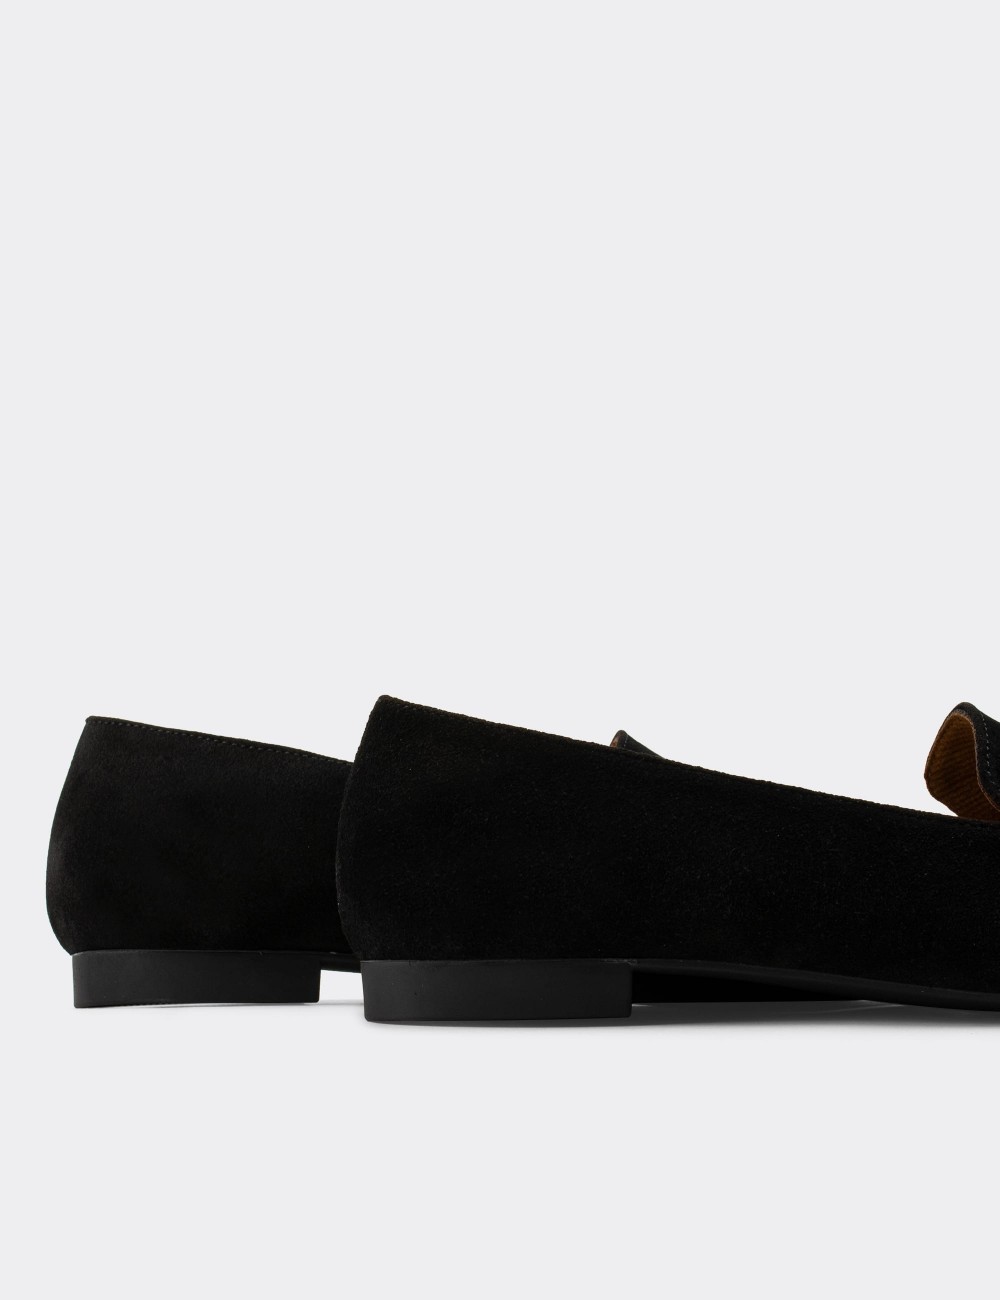 Black Suede Leather Loafers - 01899ZSYHC01